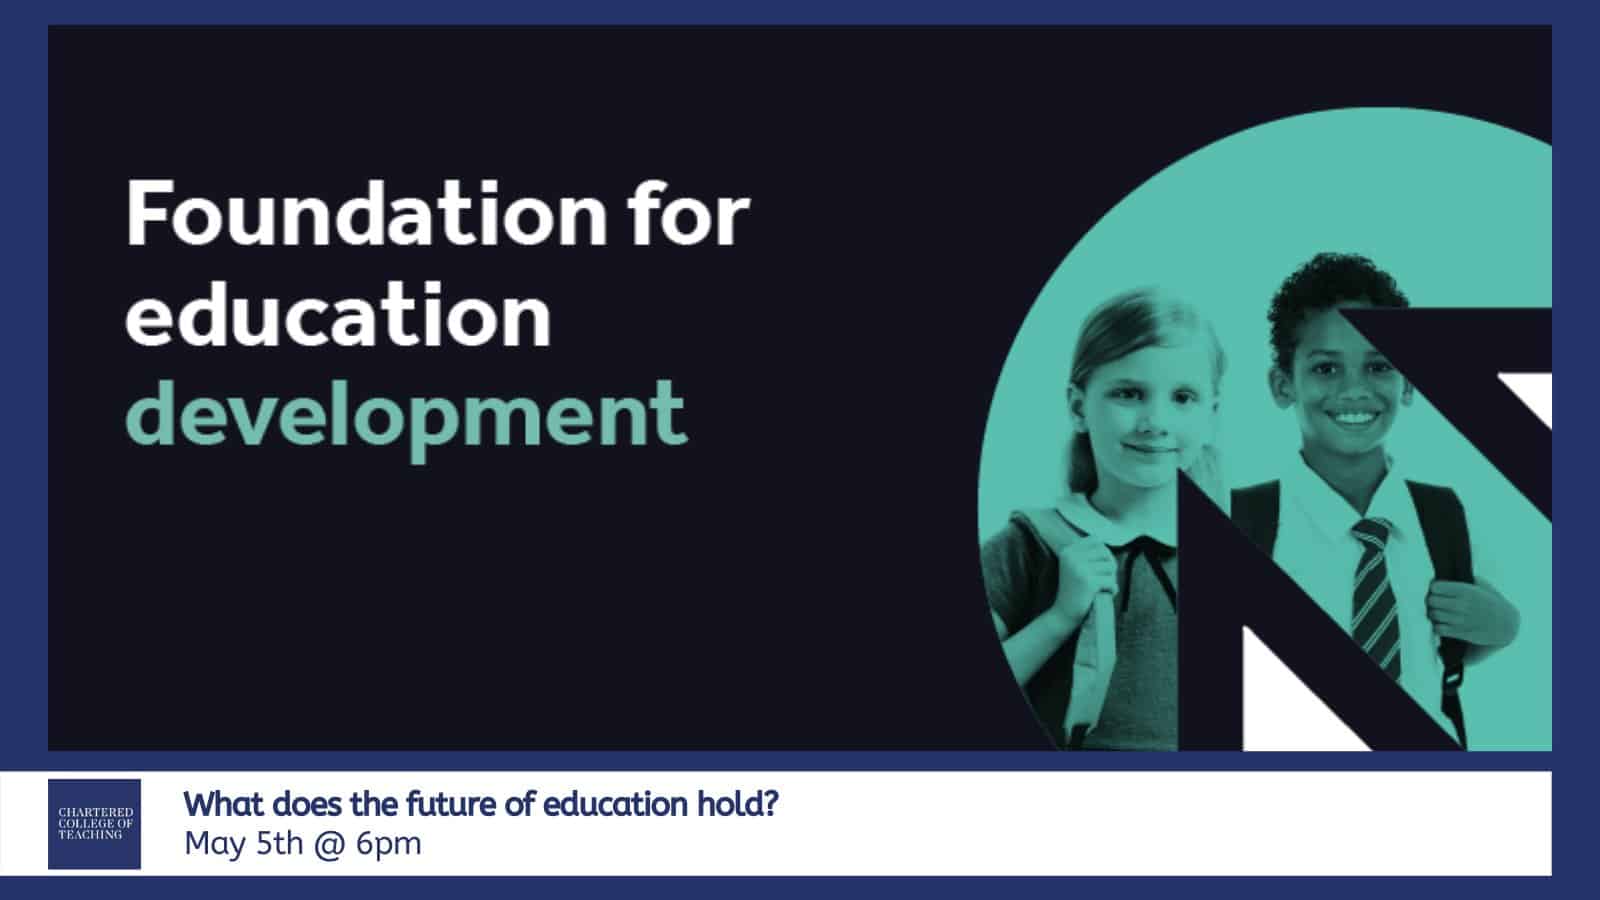 What does the future of education hold?